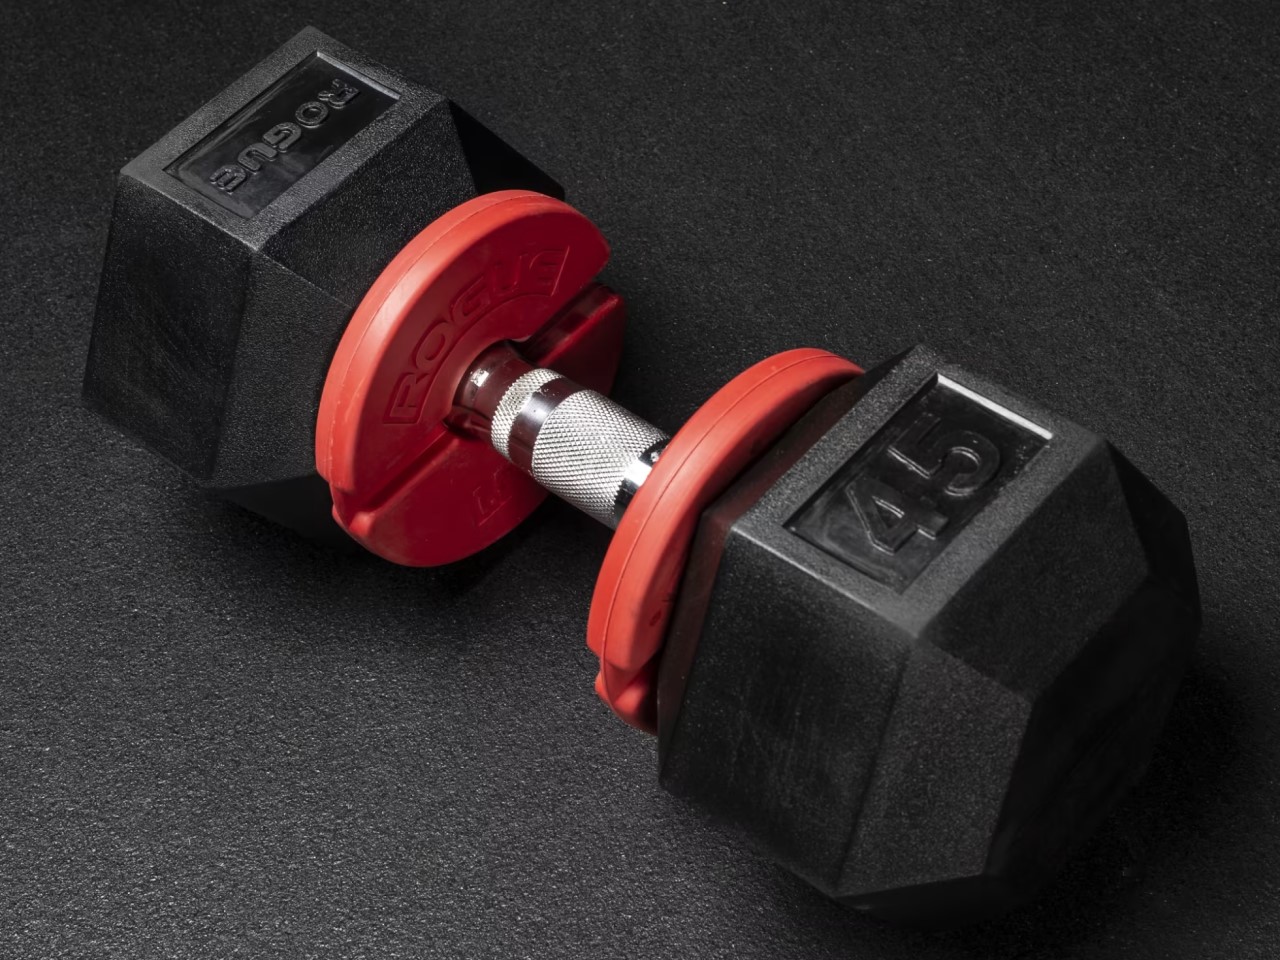 how to add weight to dumbbells